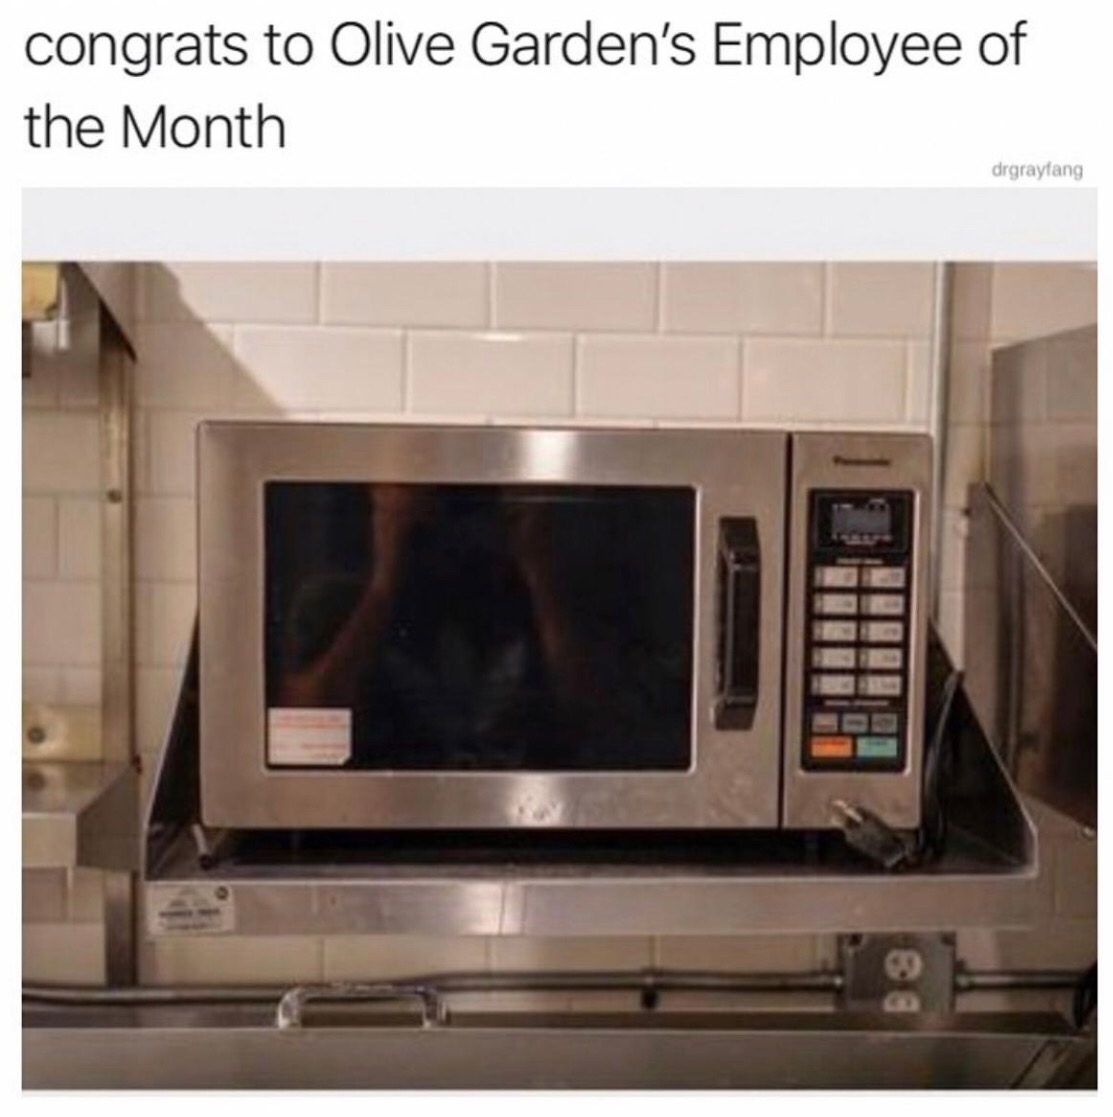 olive garden meme - microwave oven - congrats to Olive Garden's Employee of the Month drgraylang